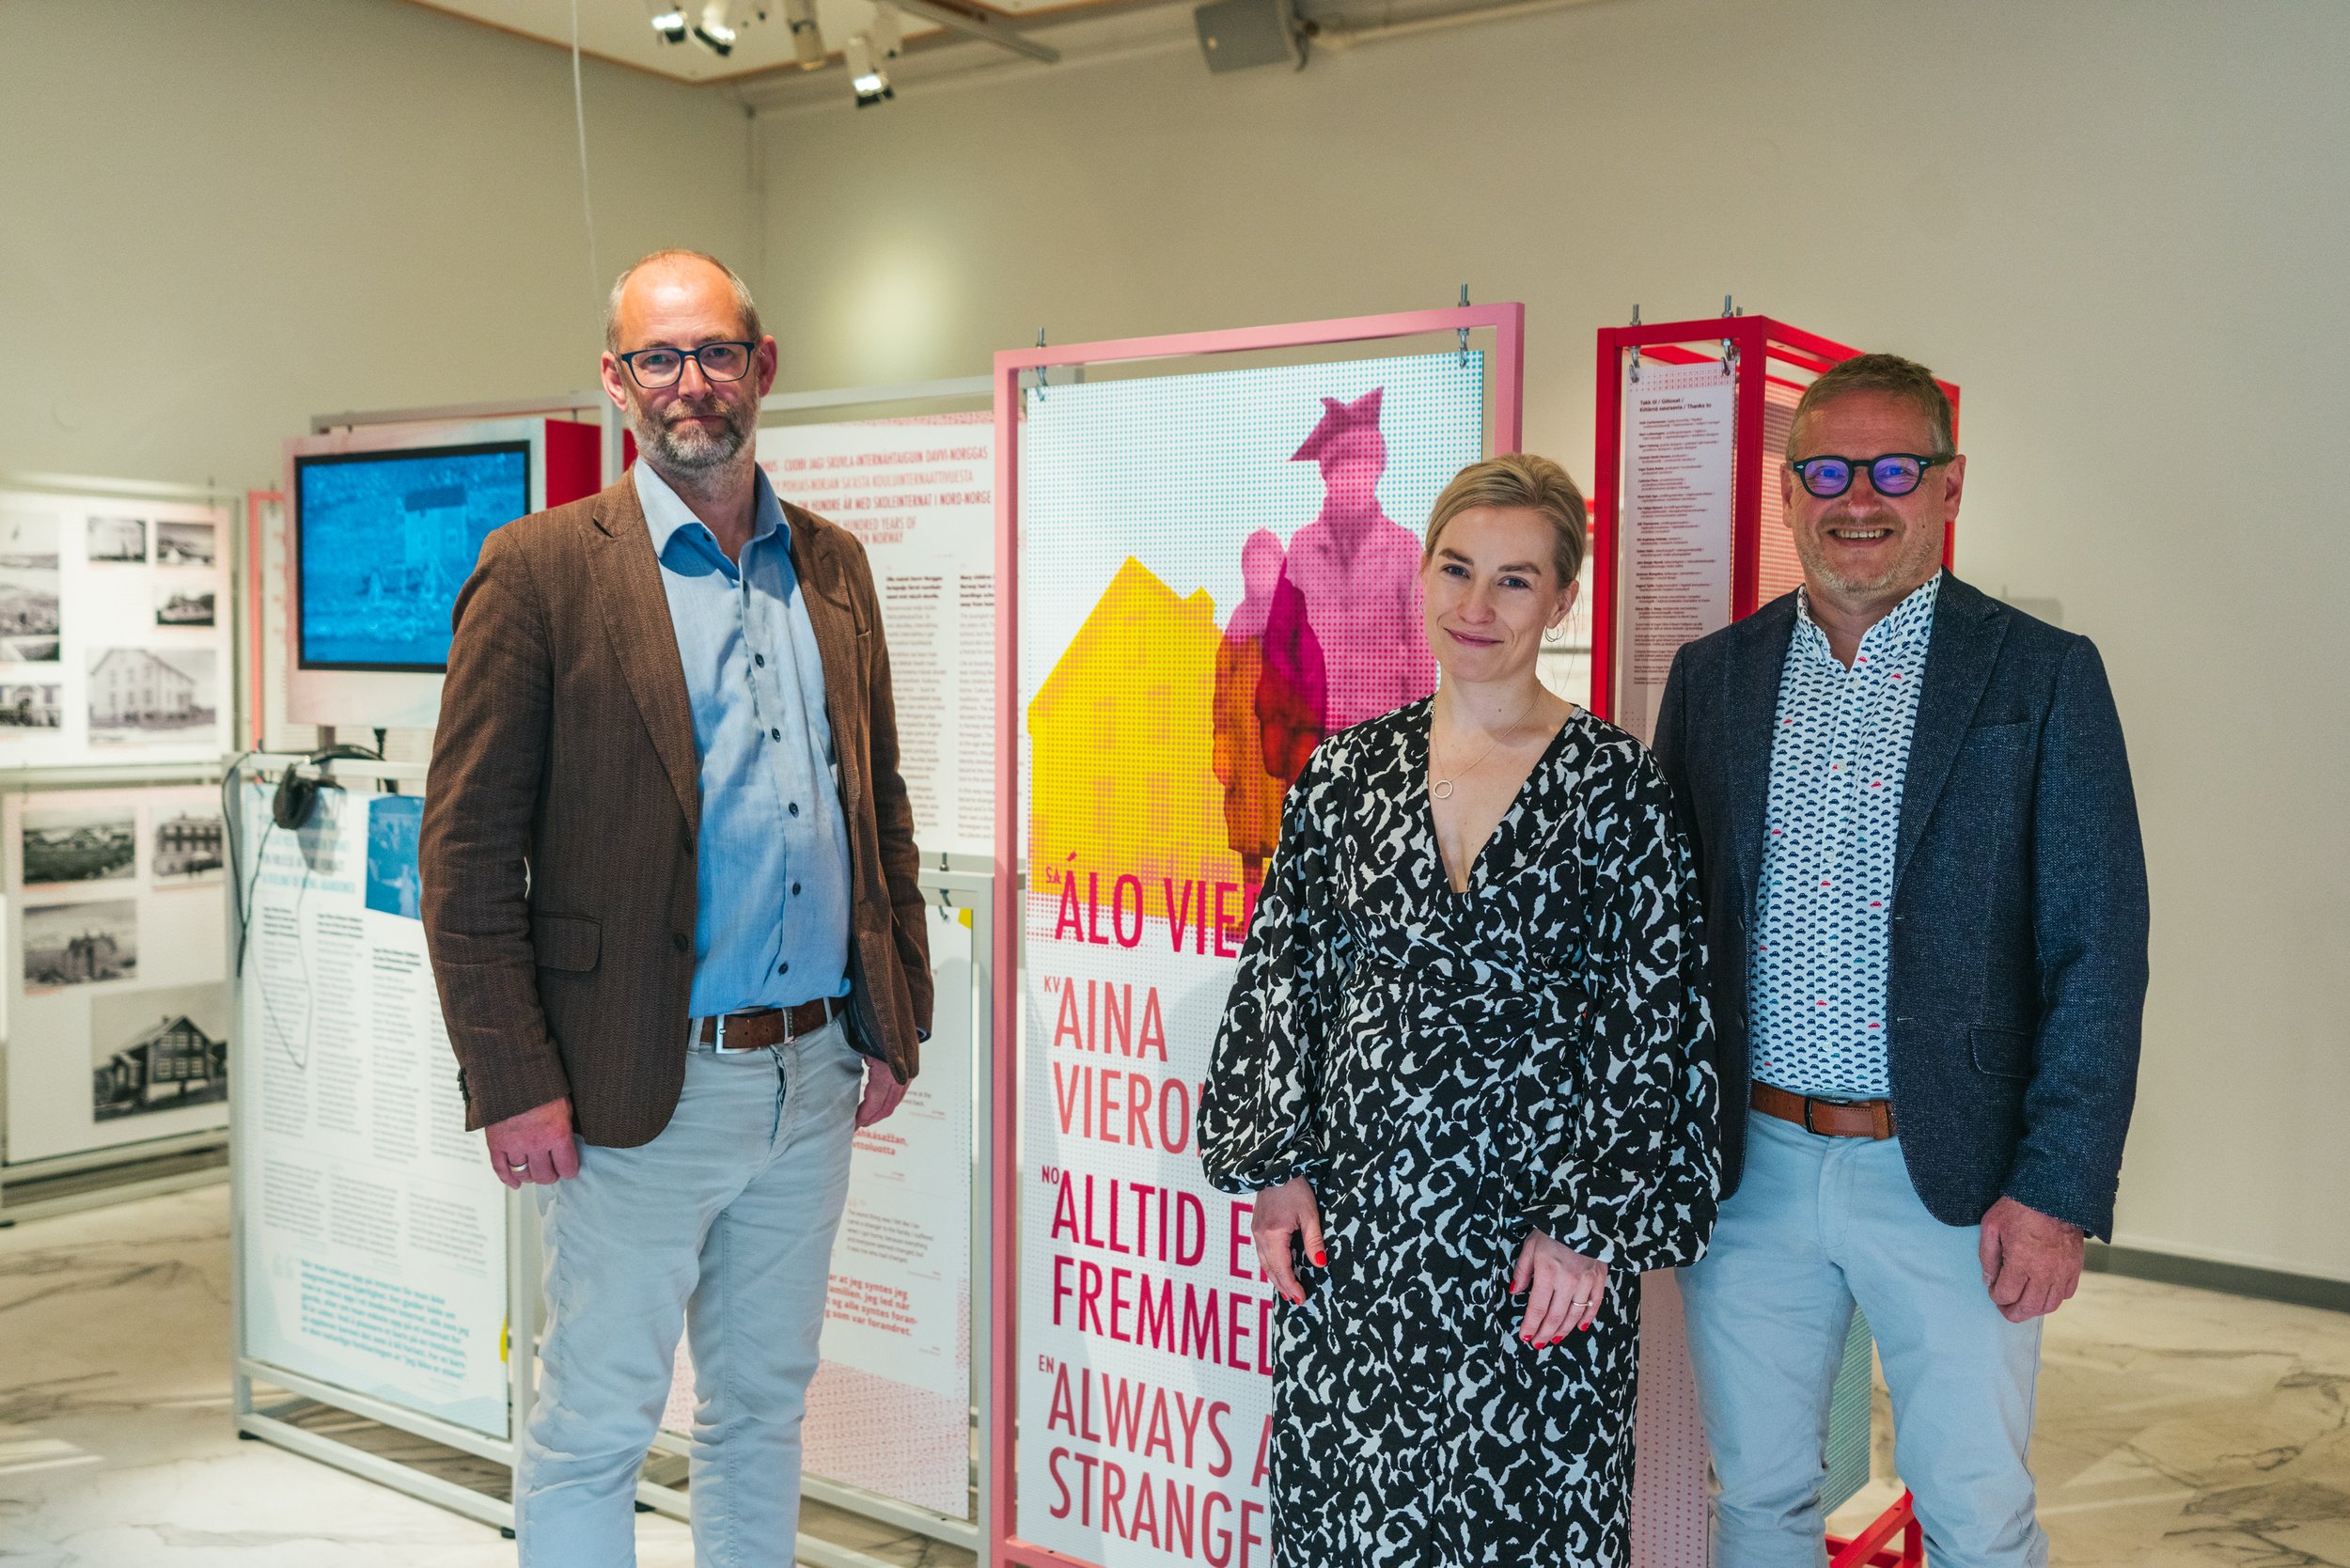  Pictured in the exhibition, from the left;   Ketil Zachariassen, Mari Lotherington and Bjørn Hatteng 